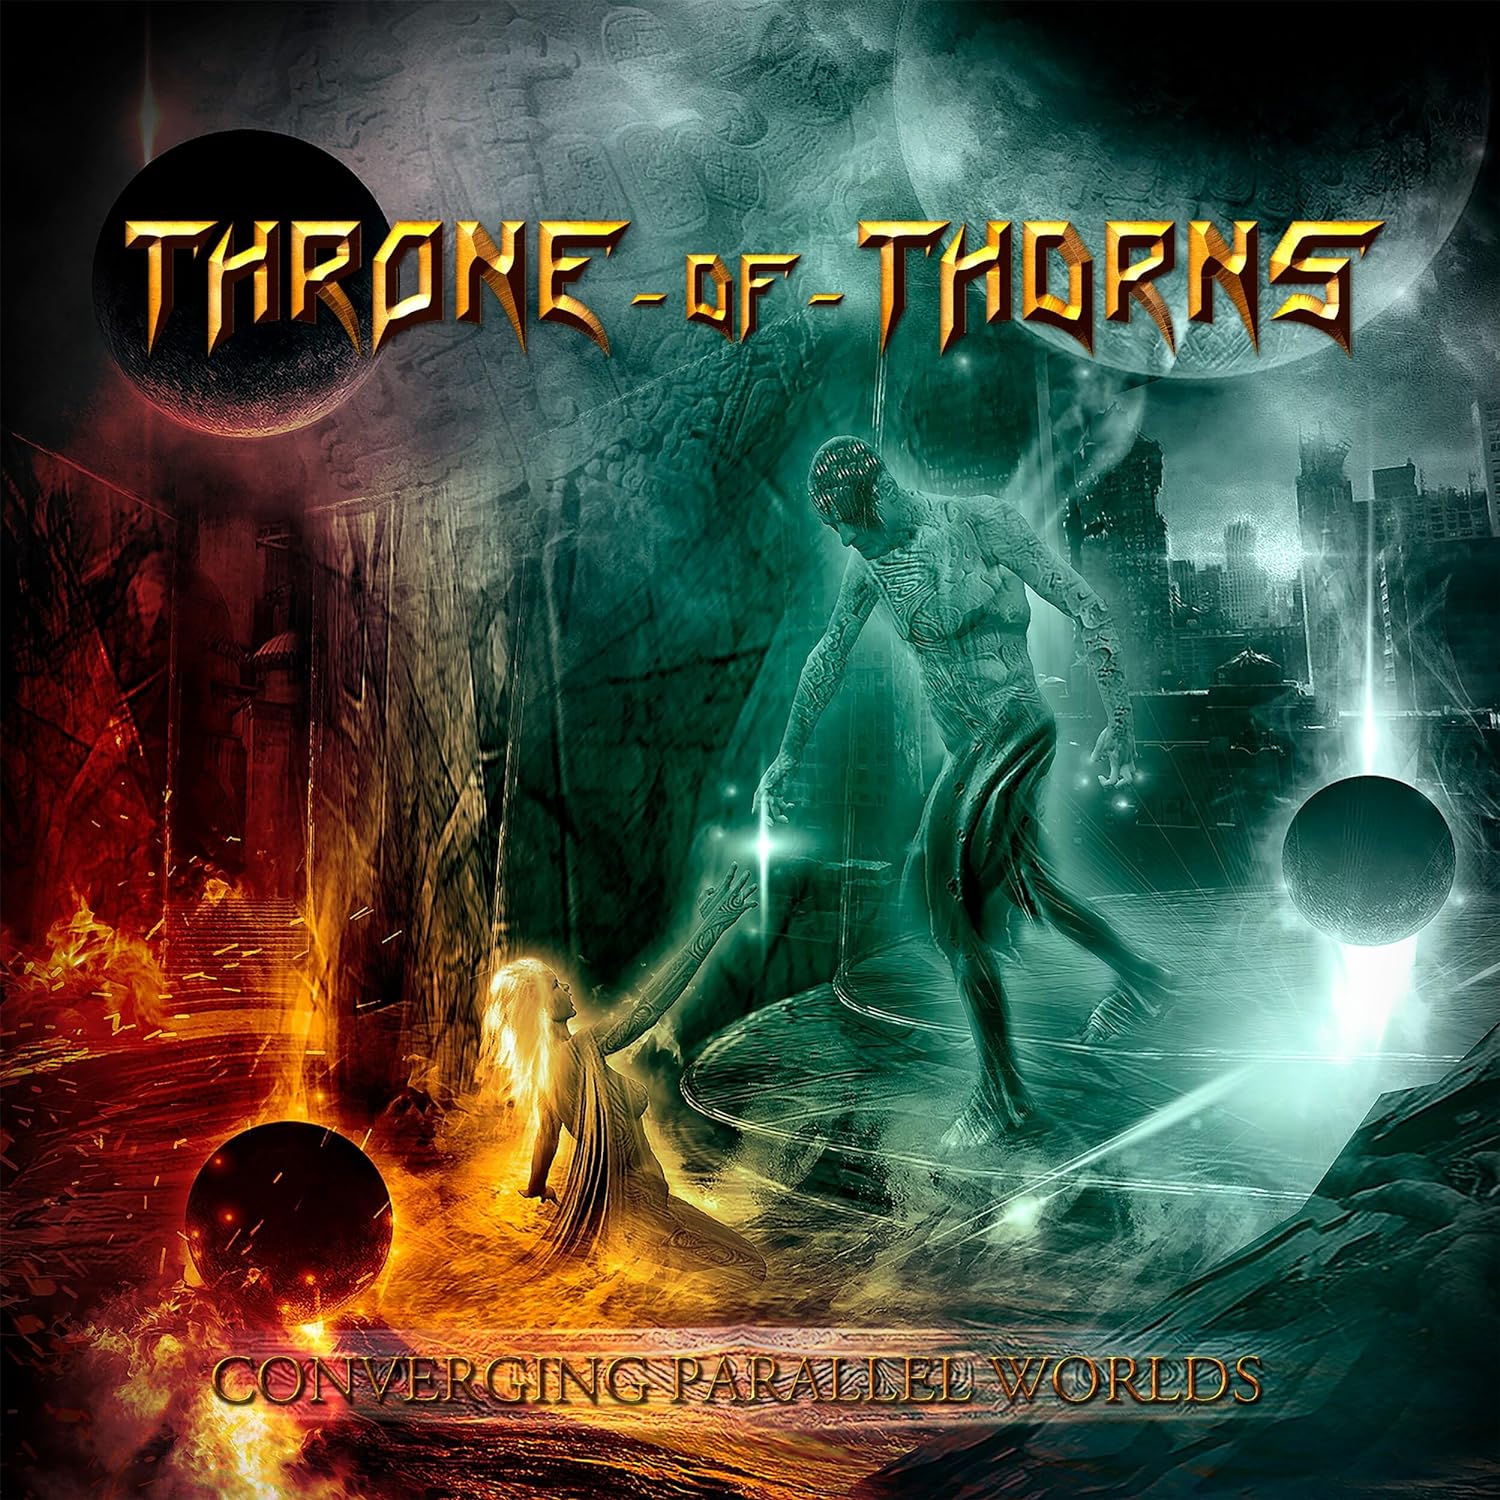 Throne of Thorns (Power Metal)